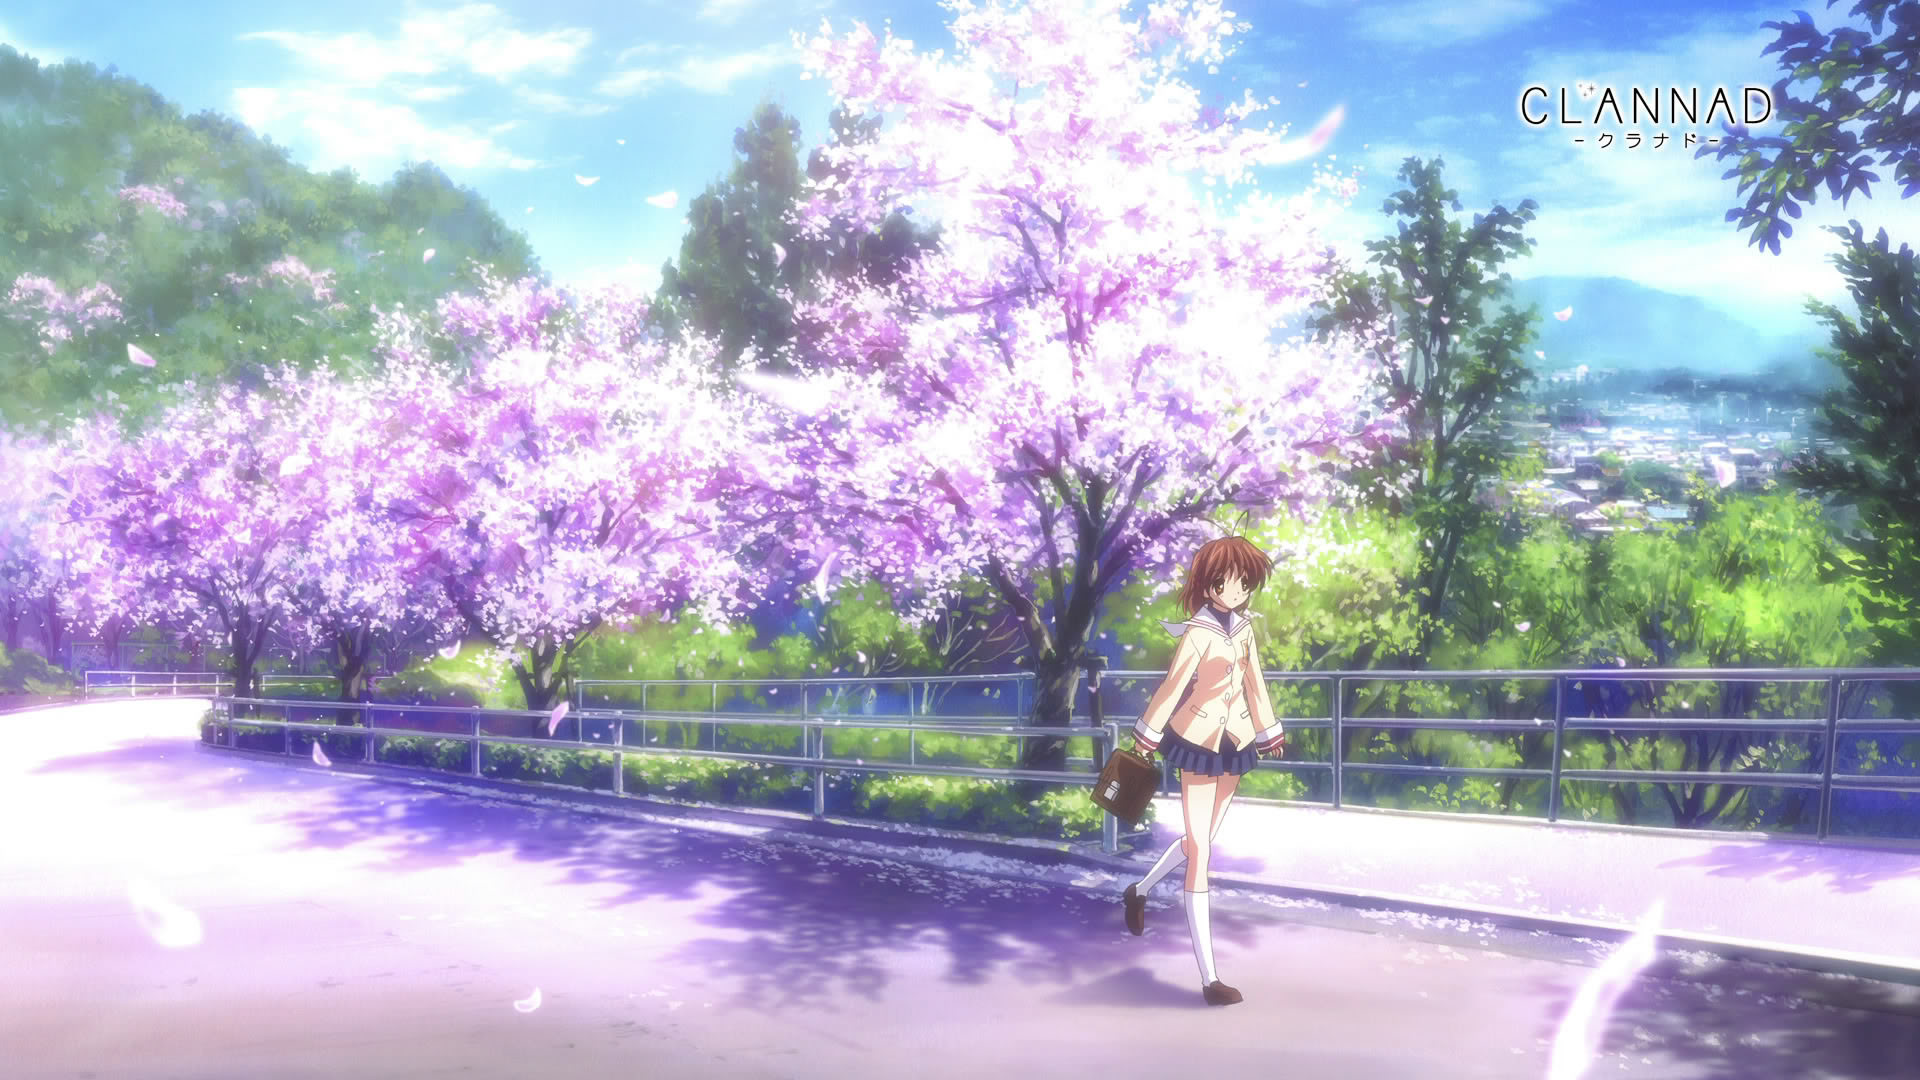 Cherry Blossoms Wallpaper Cherry, Blossoms, Clannad